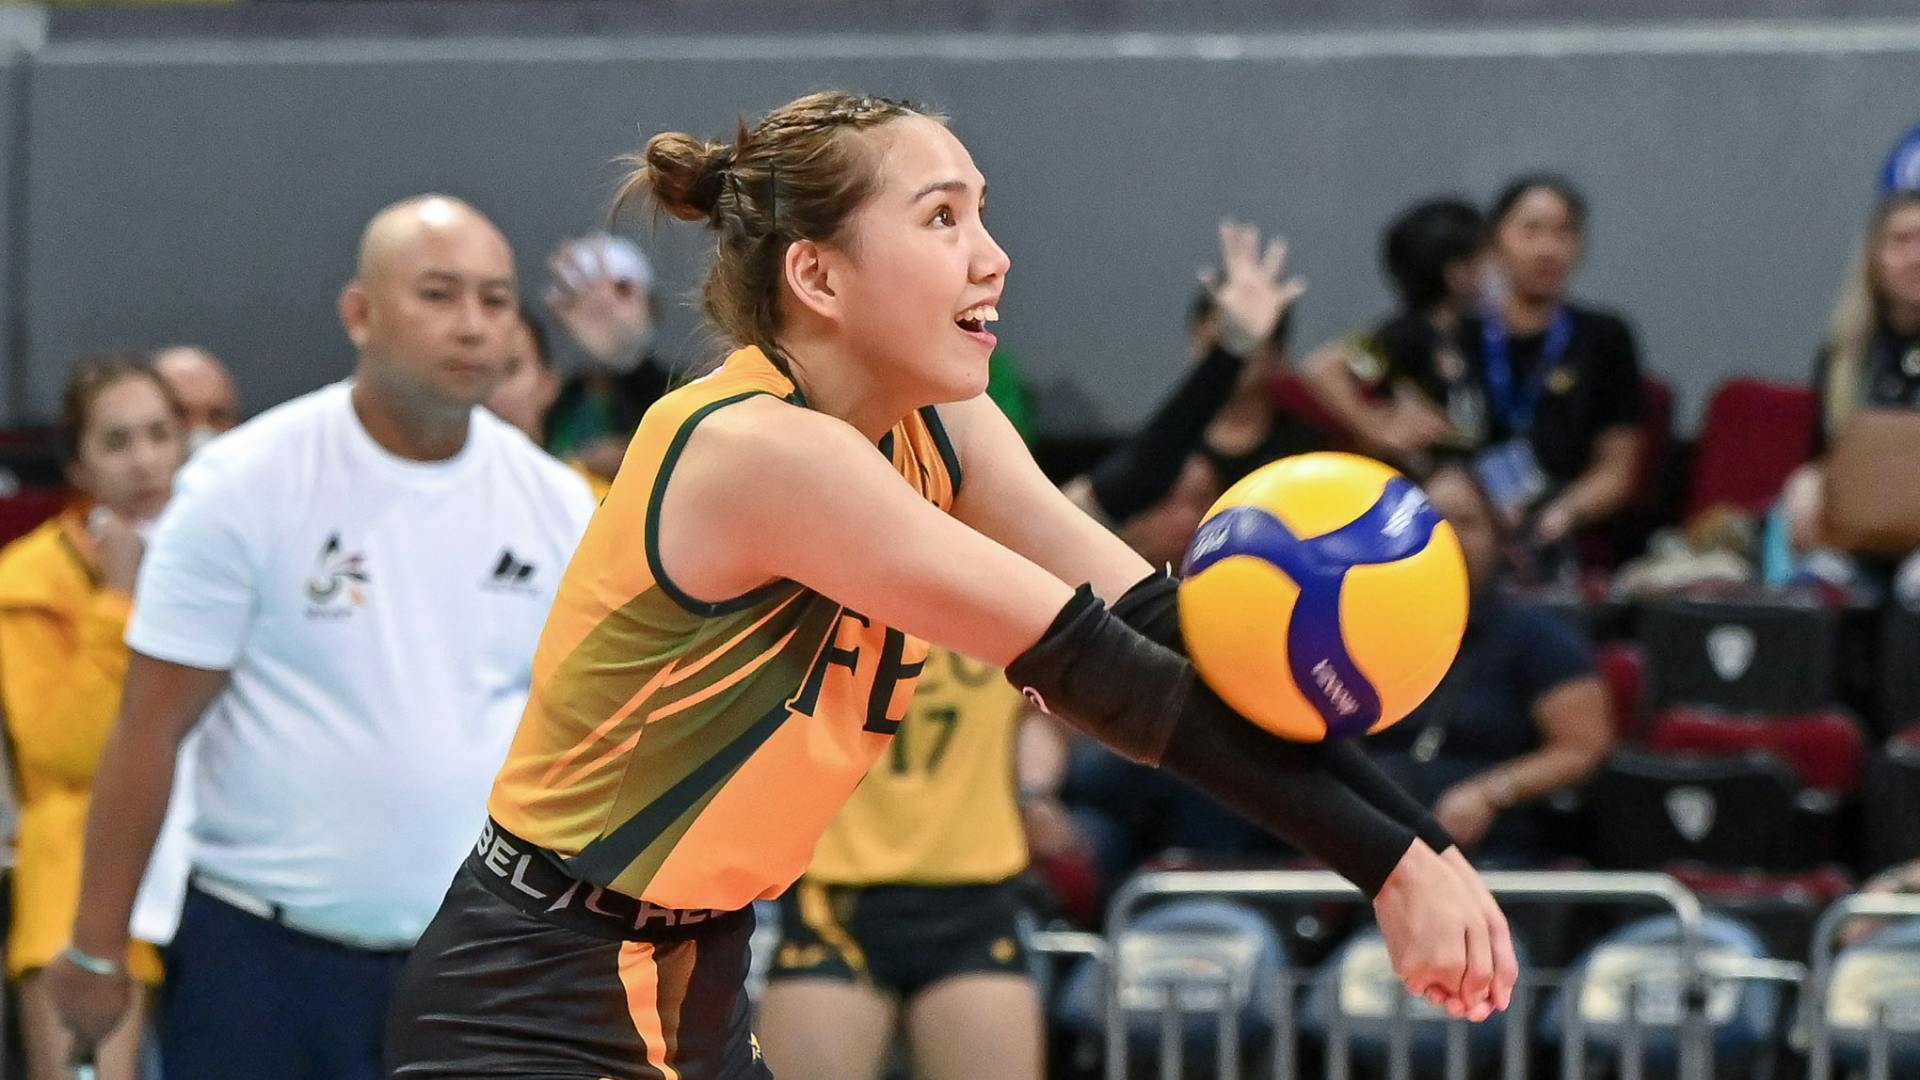 PVL: Max Juangco turns pro with the Akari Chargers